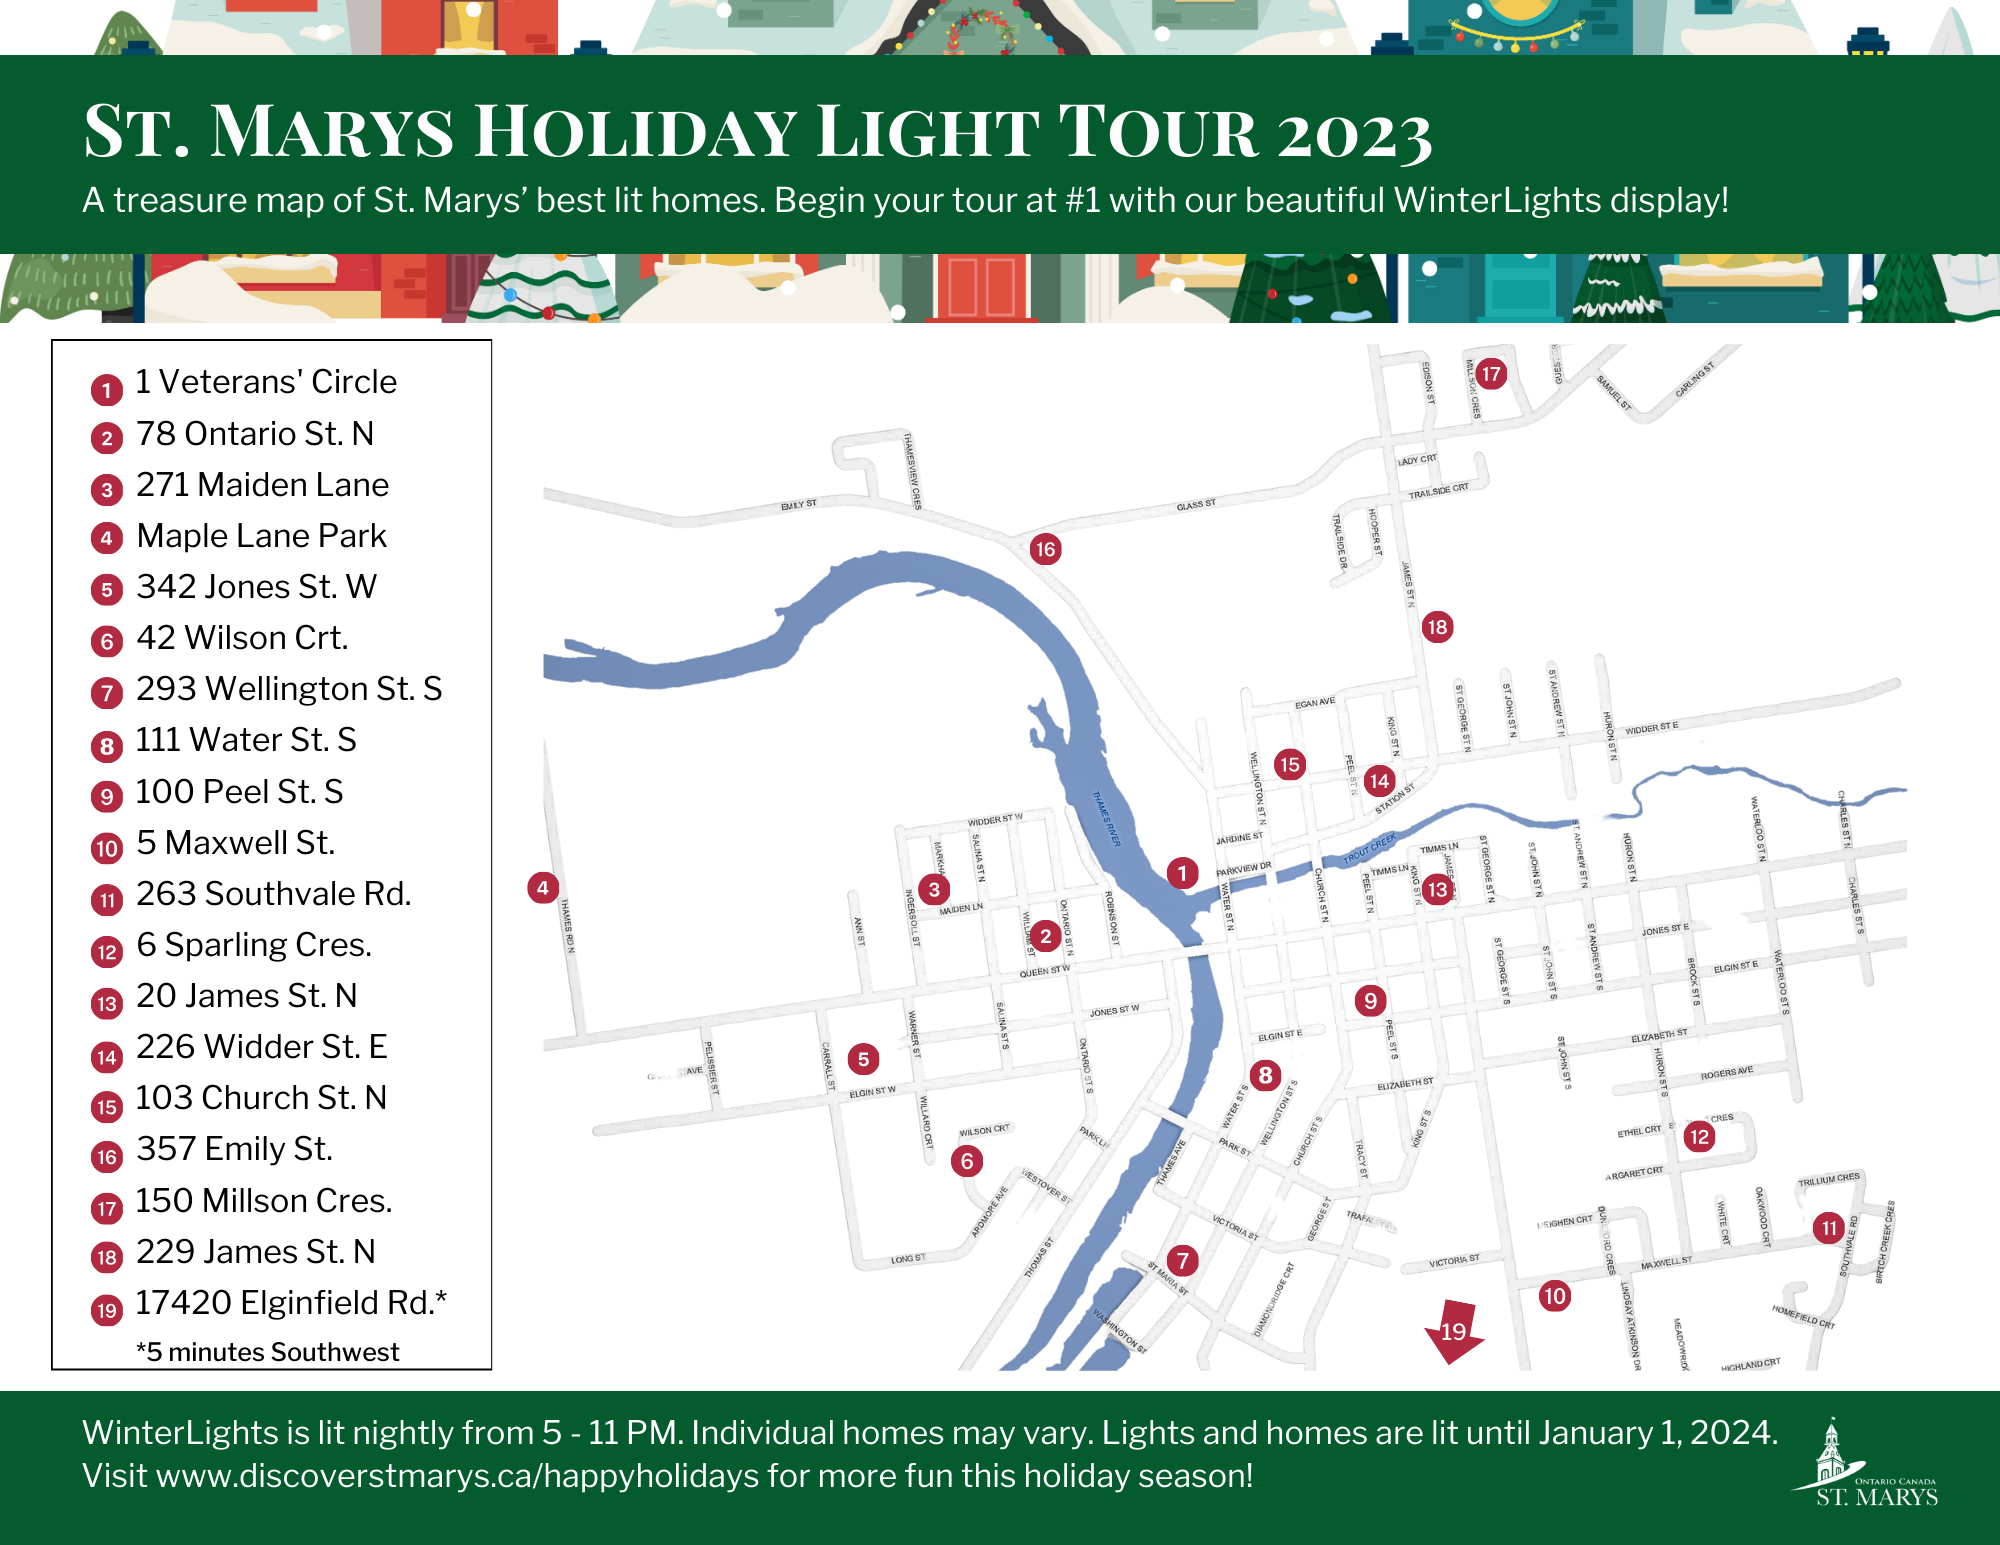 Photo of the Holiday Light Tour map